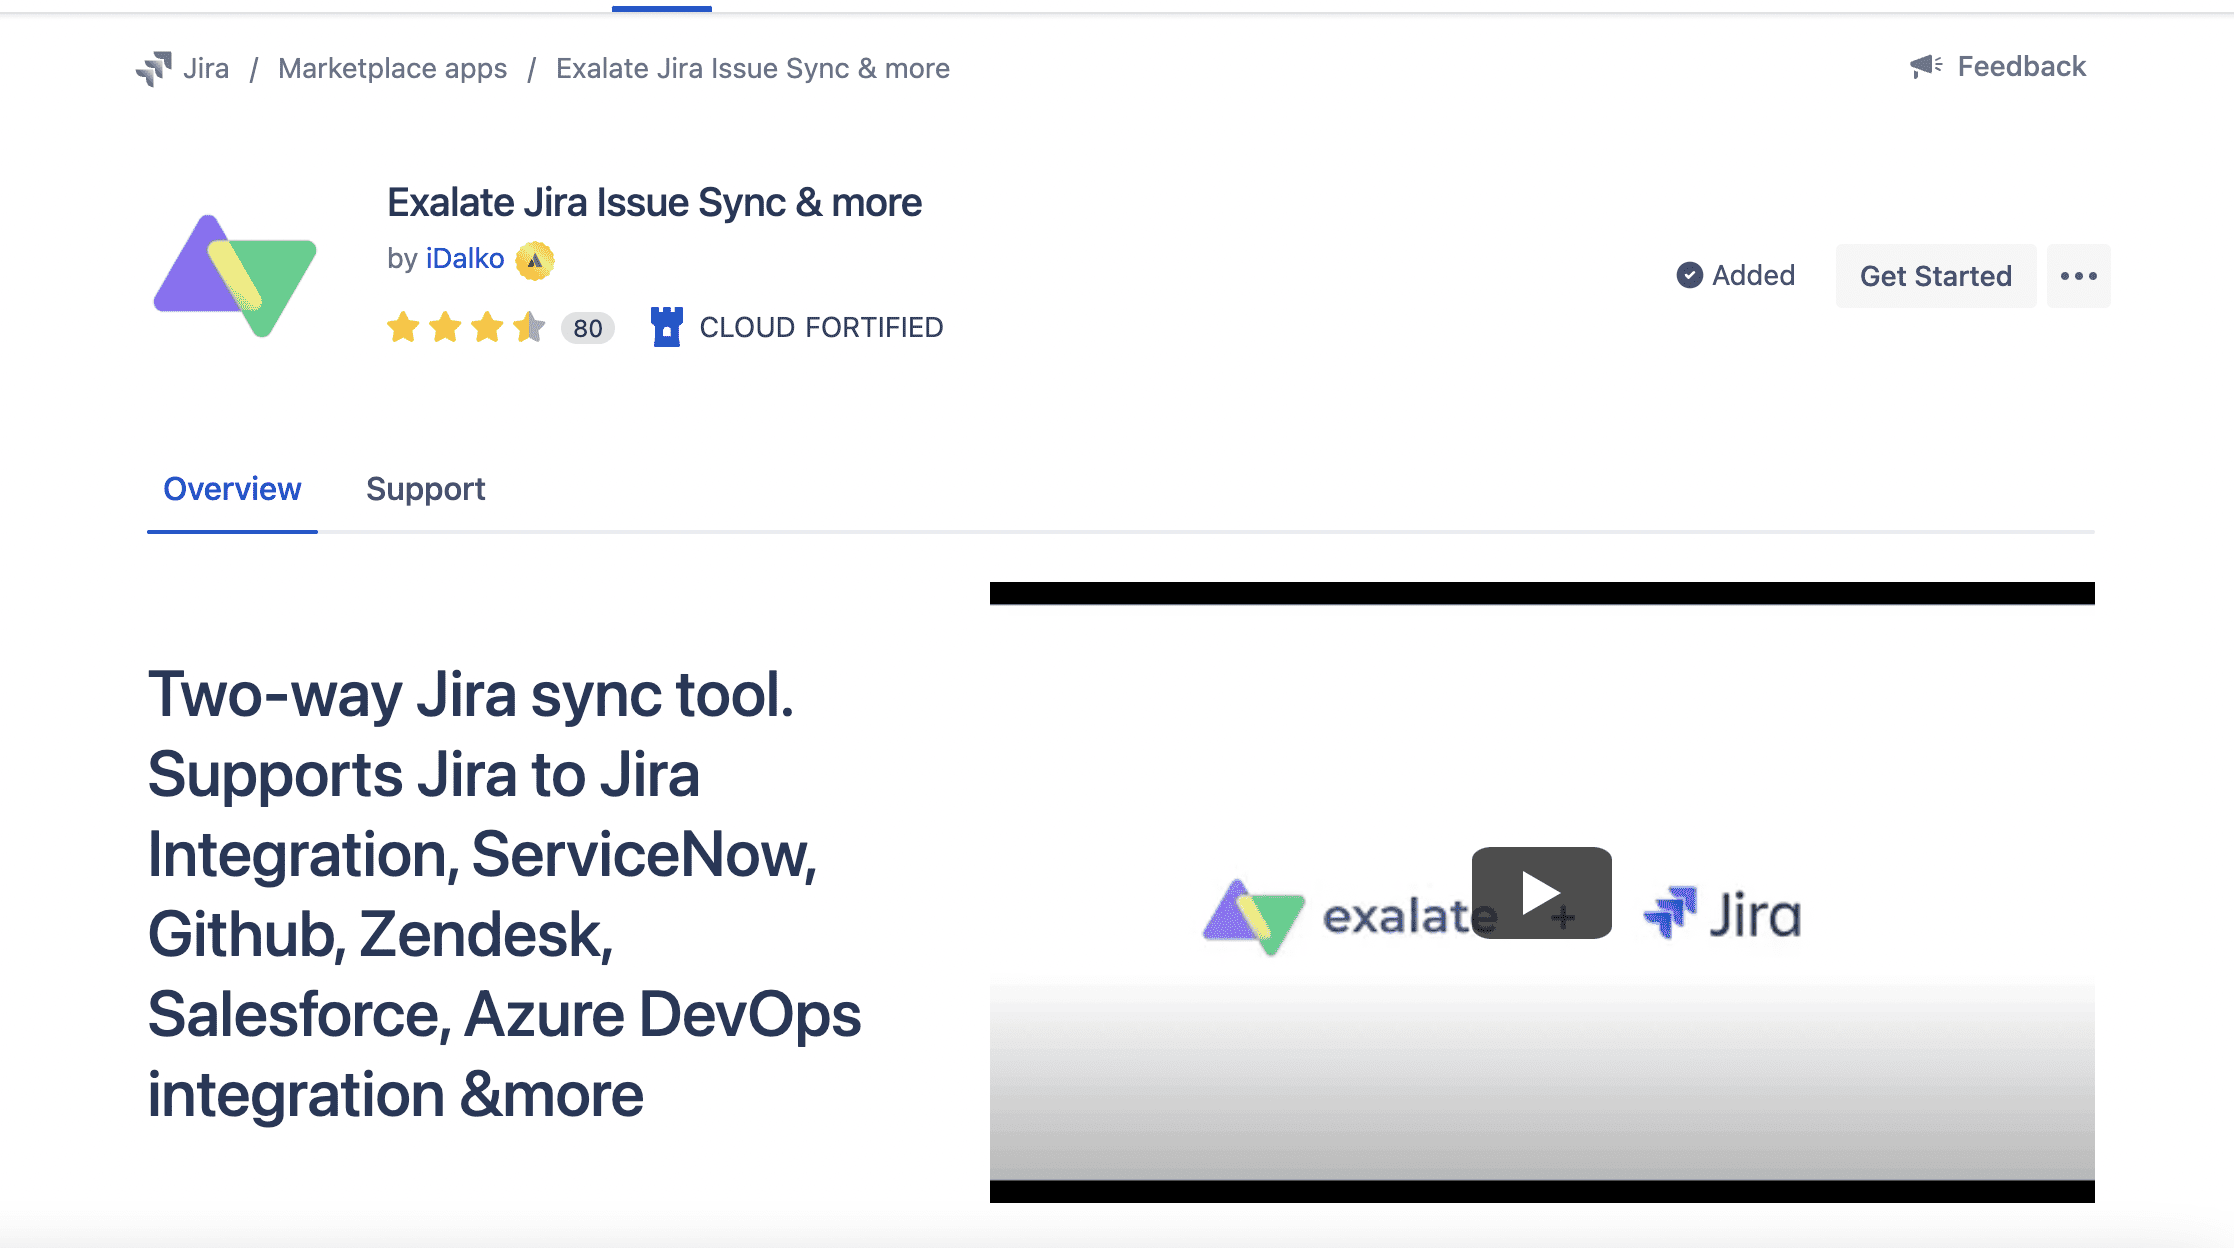 Get started with exalate for Jira